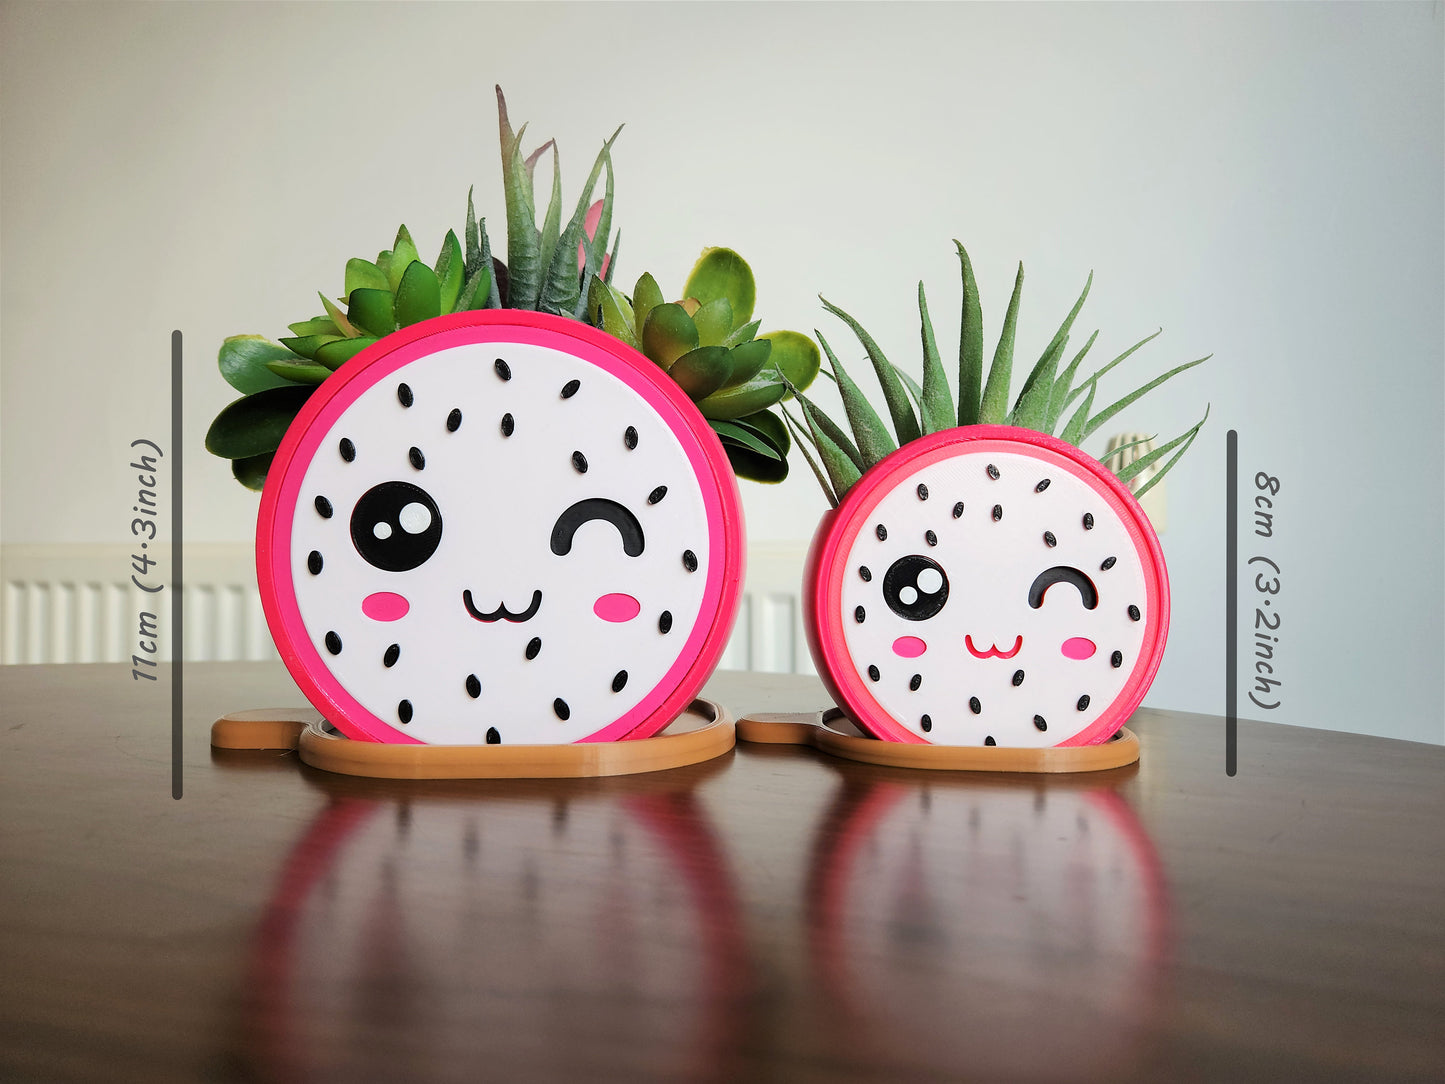 Adorable Kawaii Dragon Fruit Flower Pot with Matching Tray - Cute and Quirky Plant Home